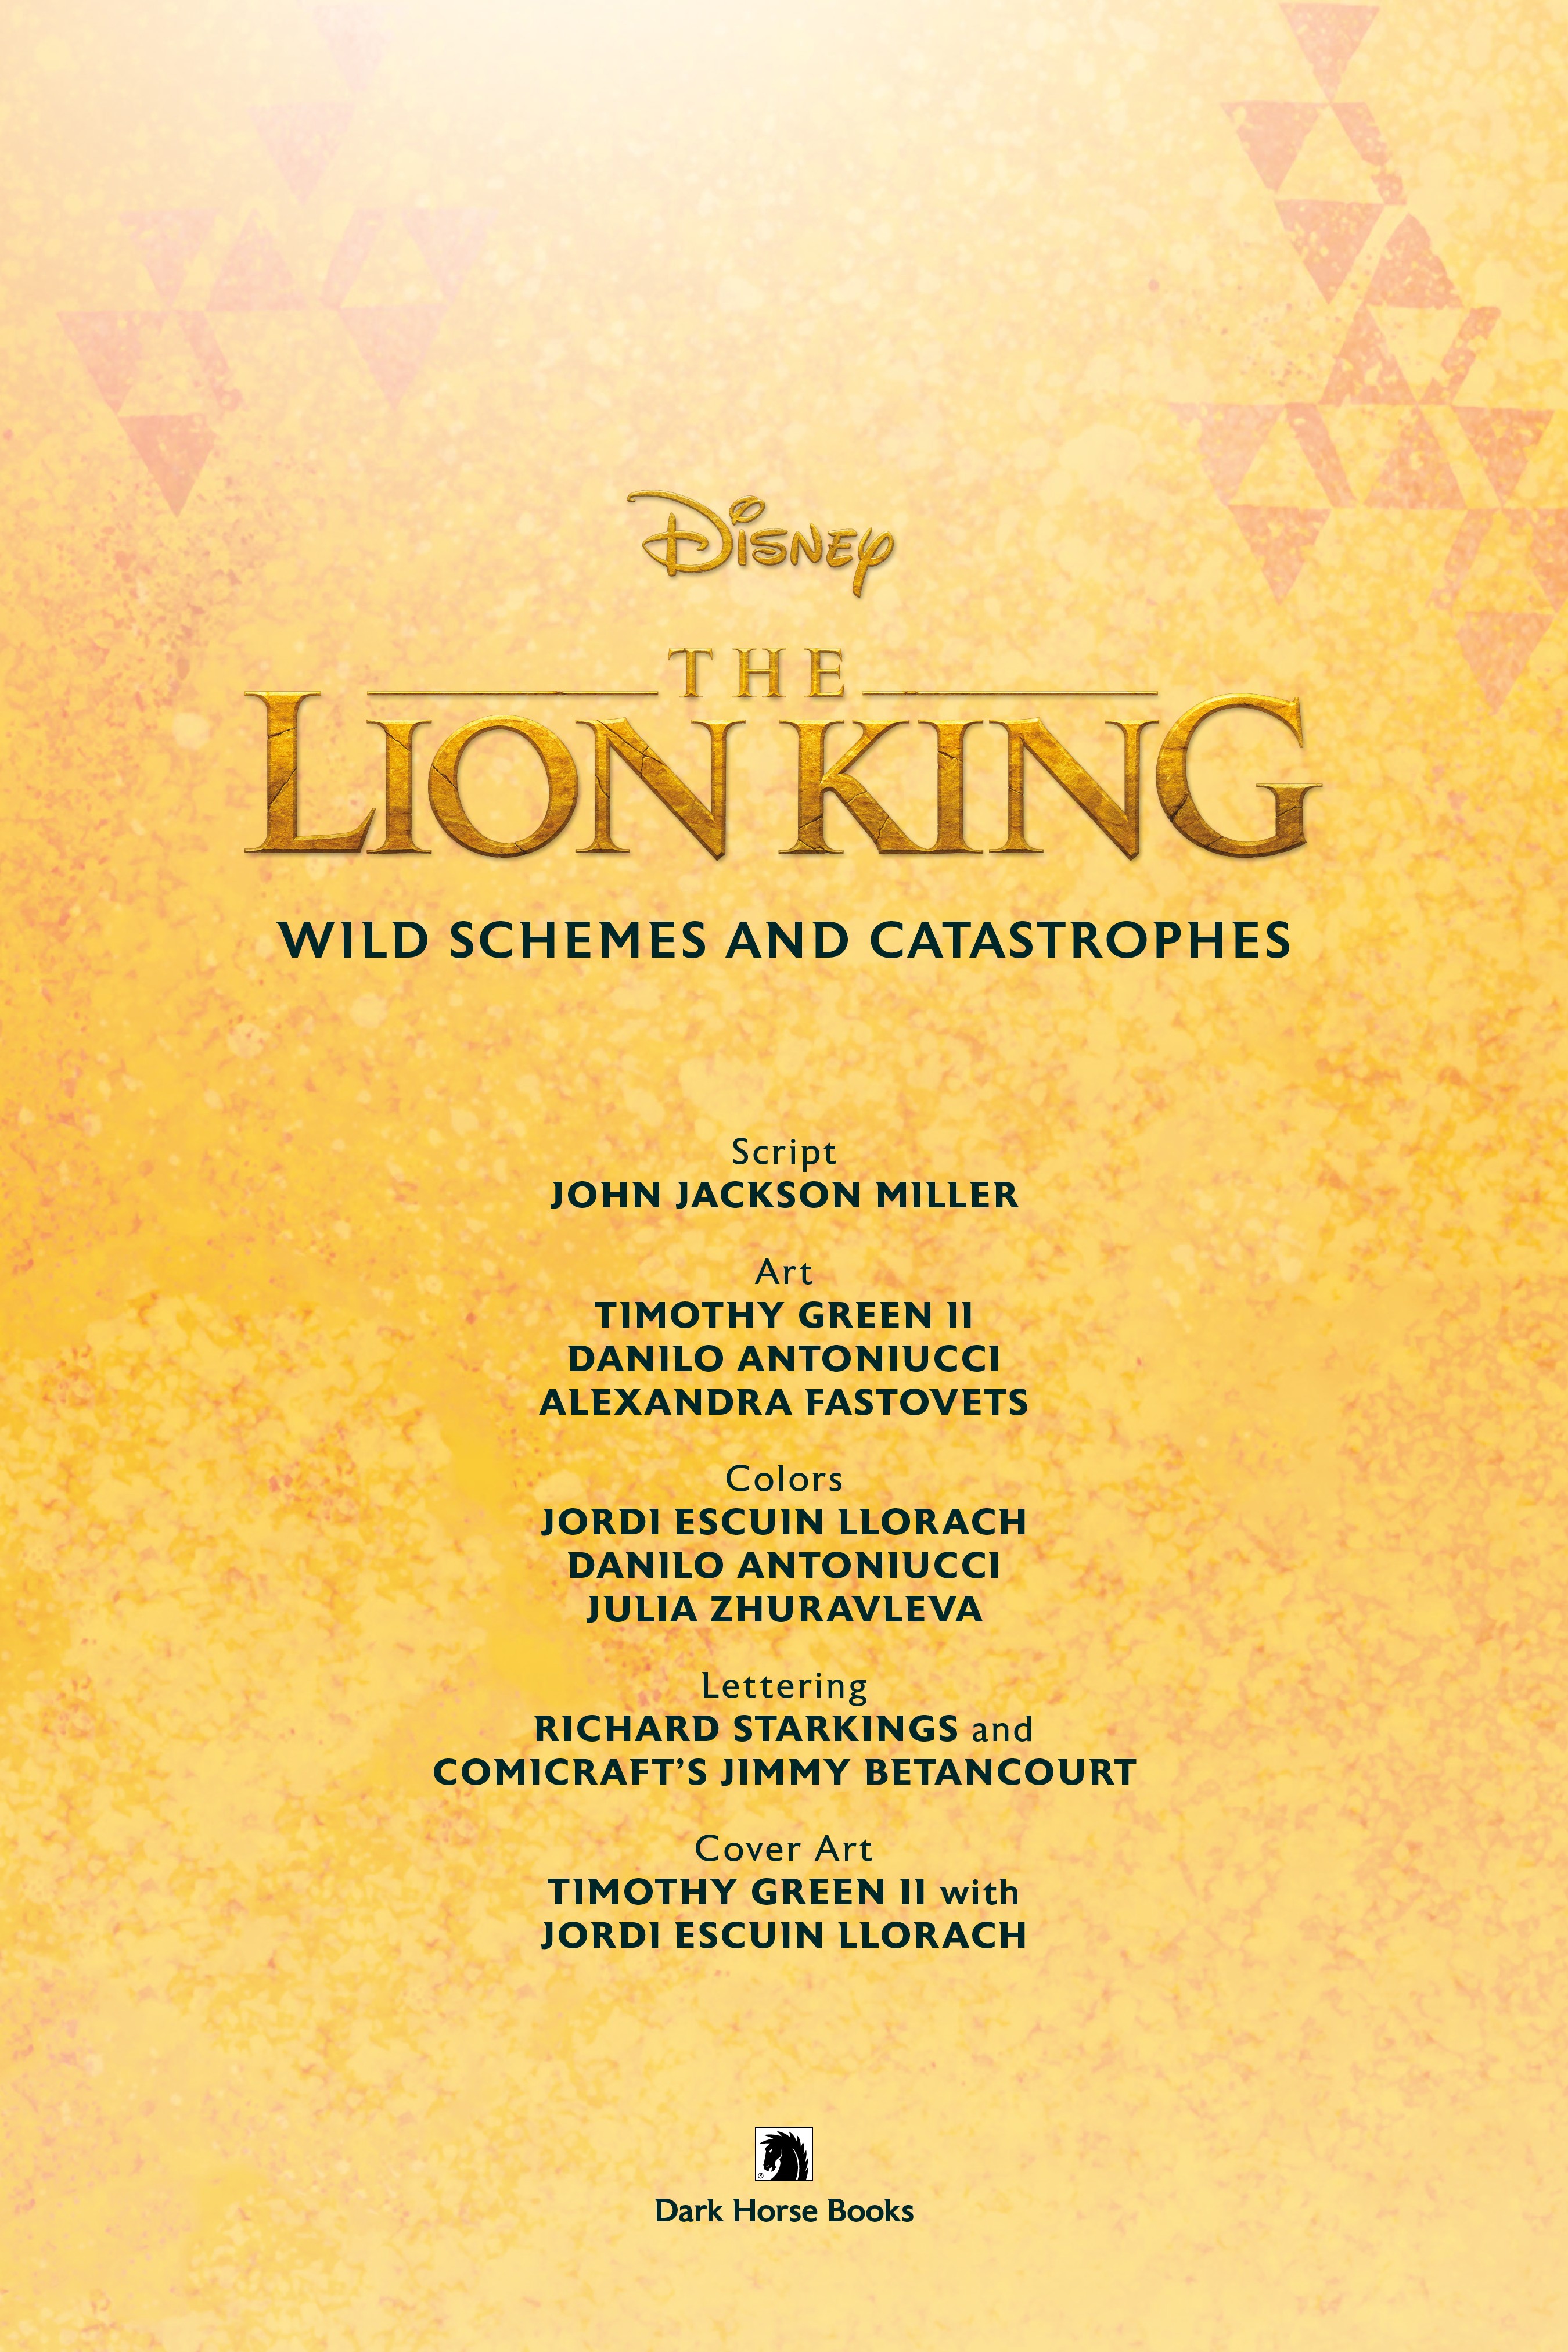 Read online Disney The Lion King: Wild Schemes and Catastrophes comic -  Issue # TPB - 4